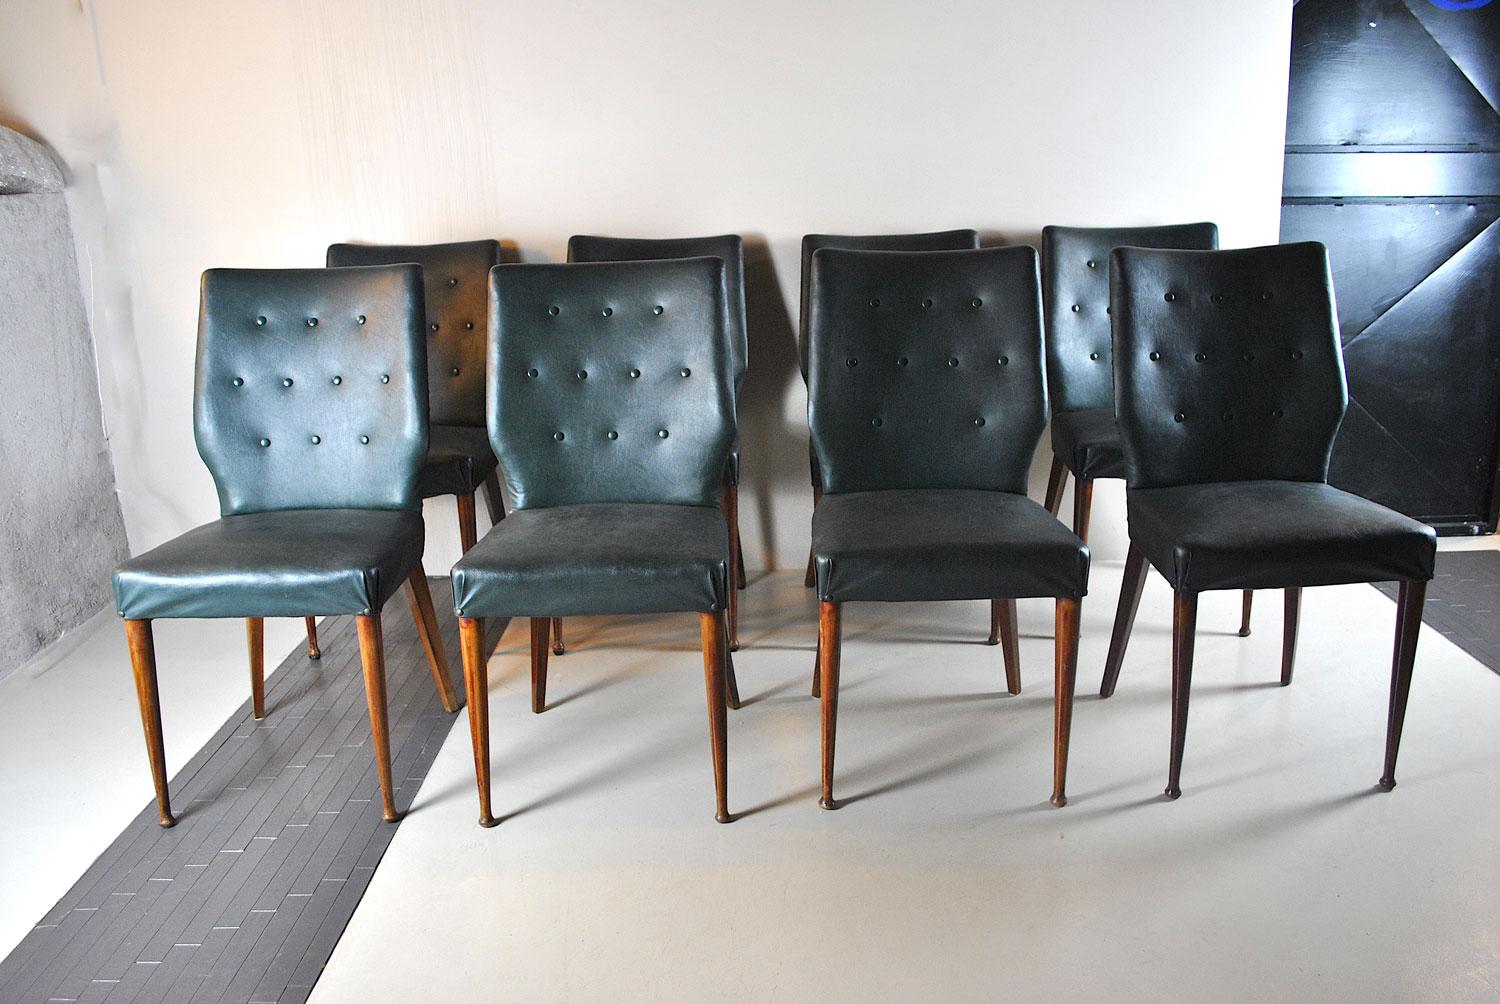 Mid-20th Century Italian Midcentury Set of Eighty 1960s Chairs in Green Faux Leather For Sale